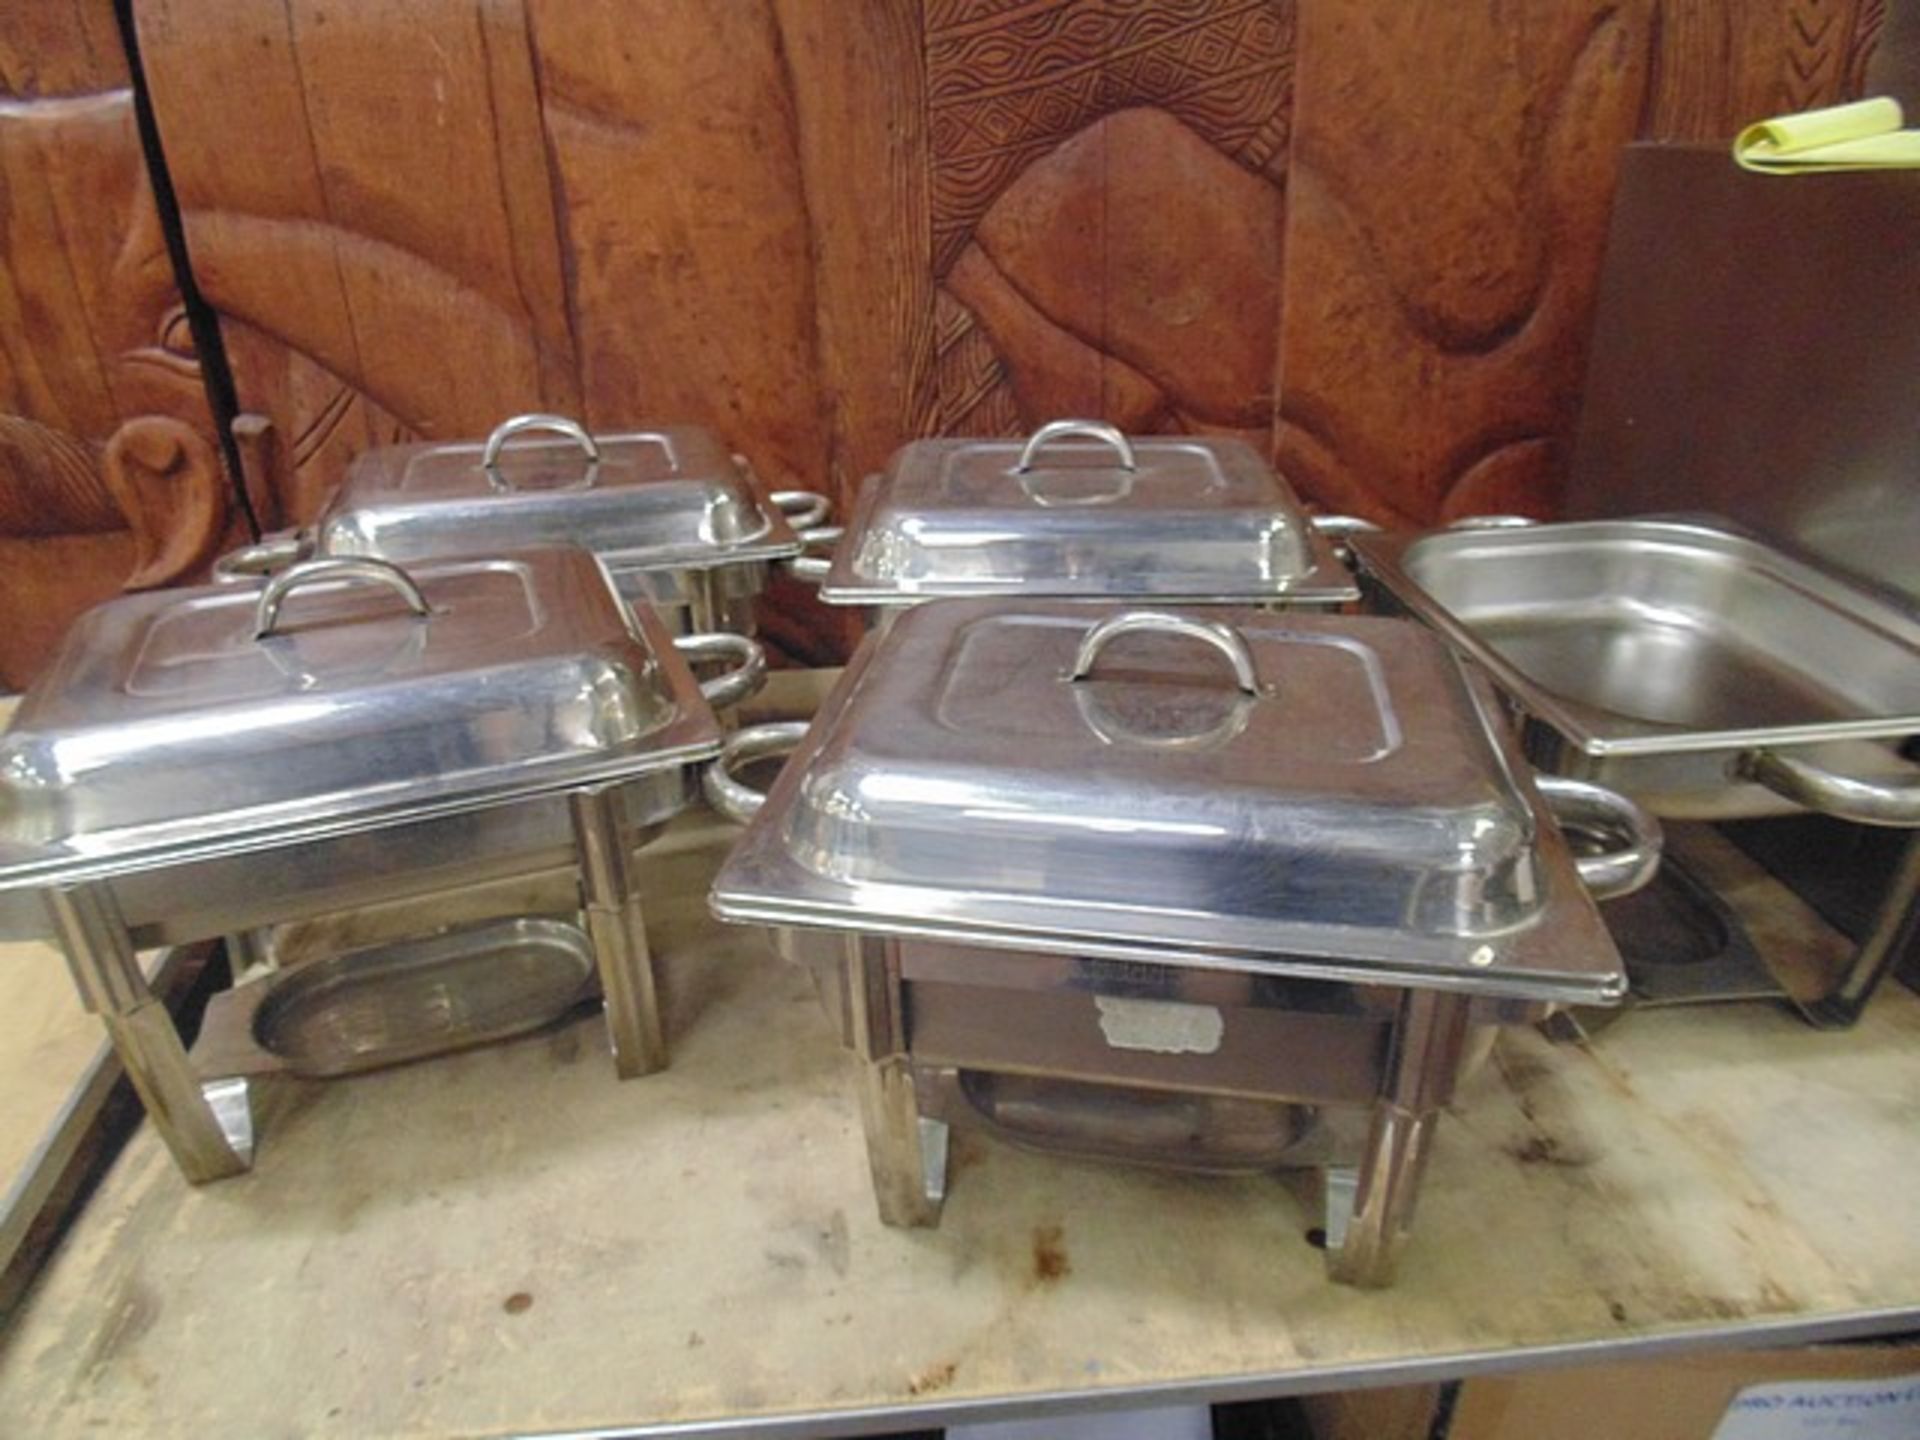 5 x stainless steel GN 1/2 chafing pans with fuel burner stands 375 x D 290 x H 320 mm